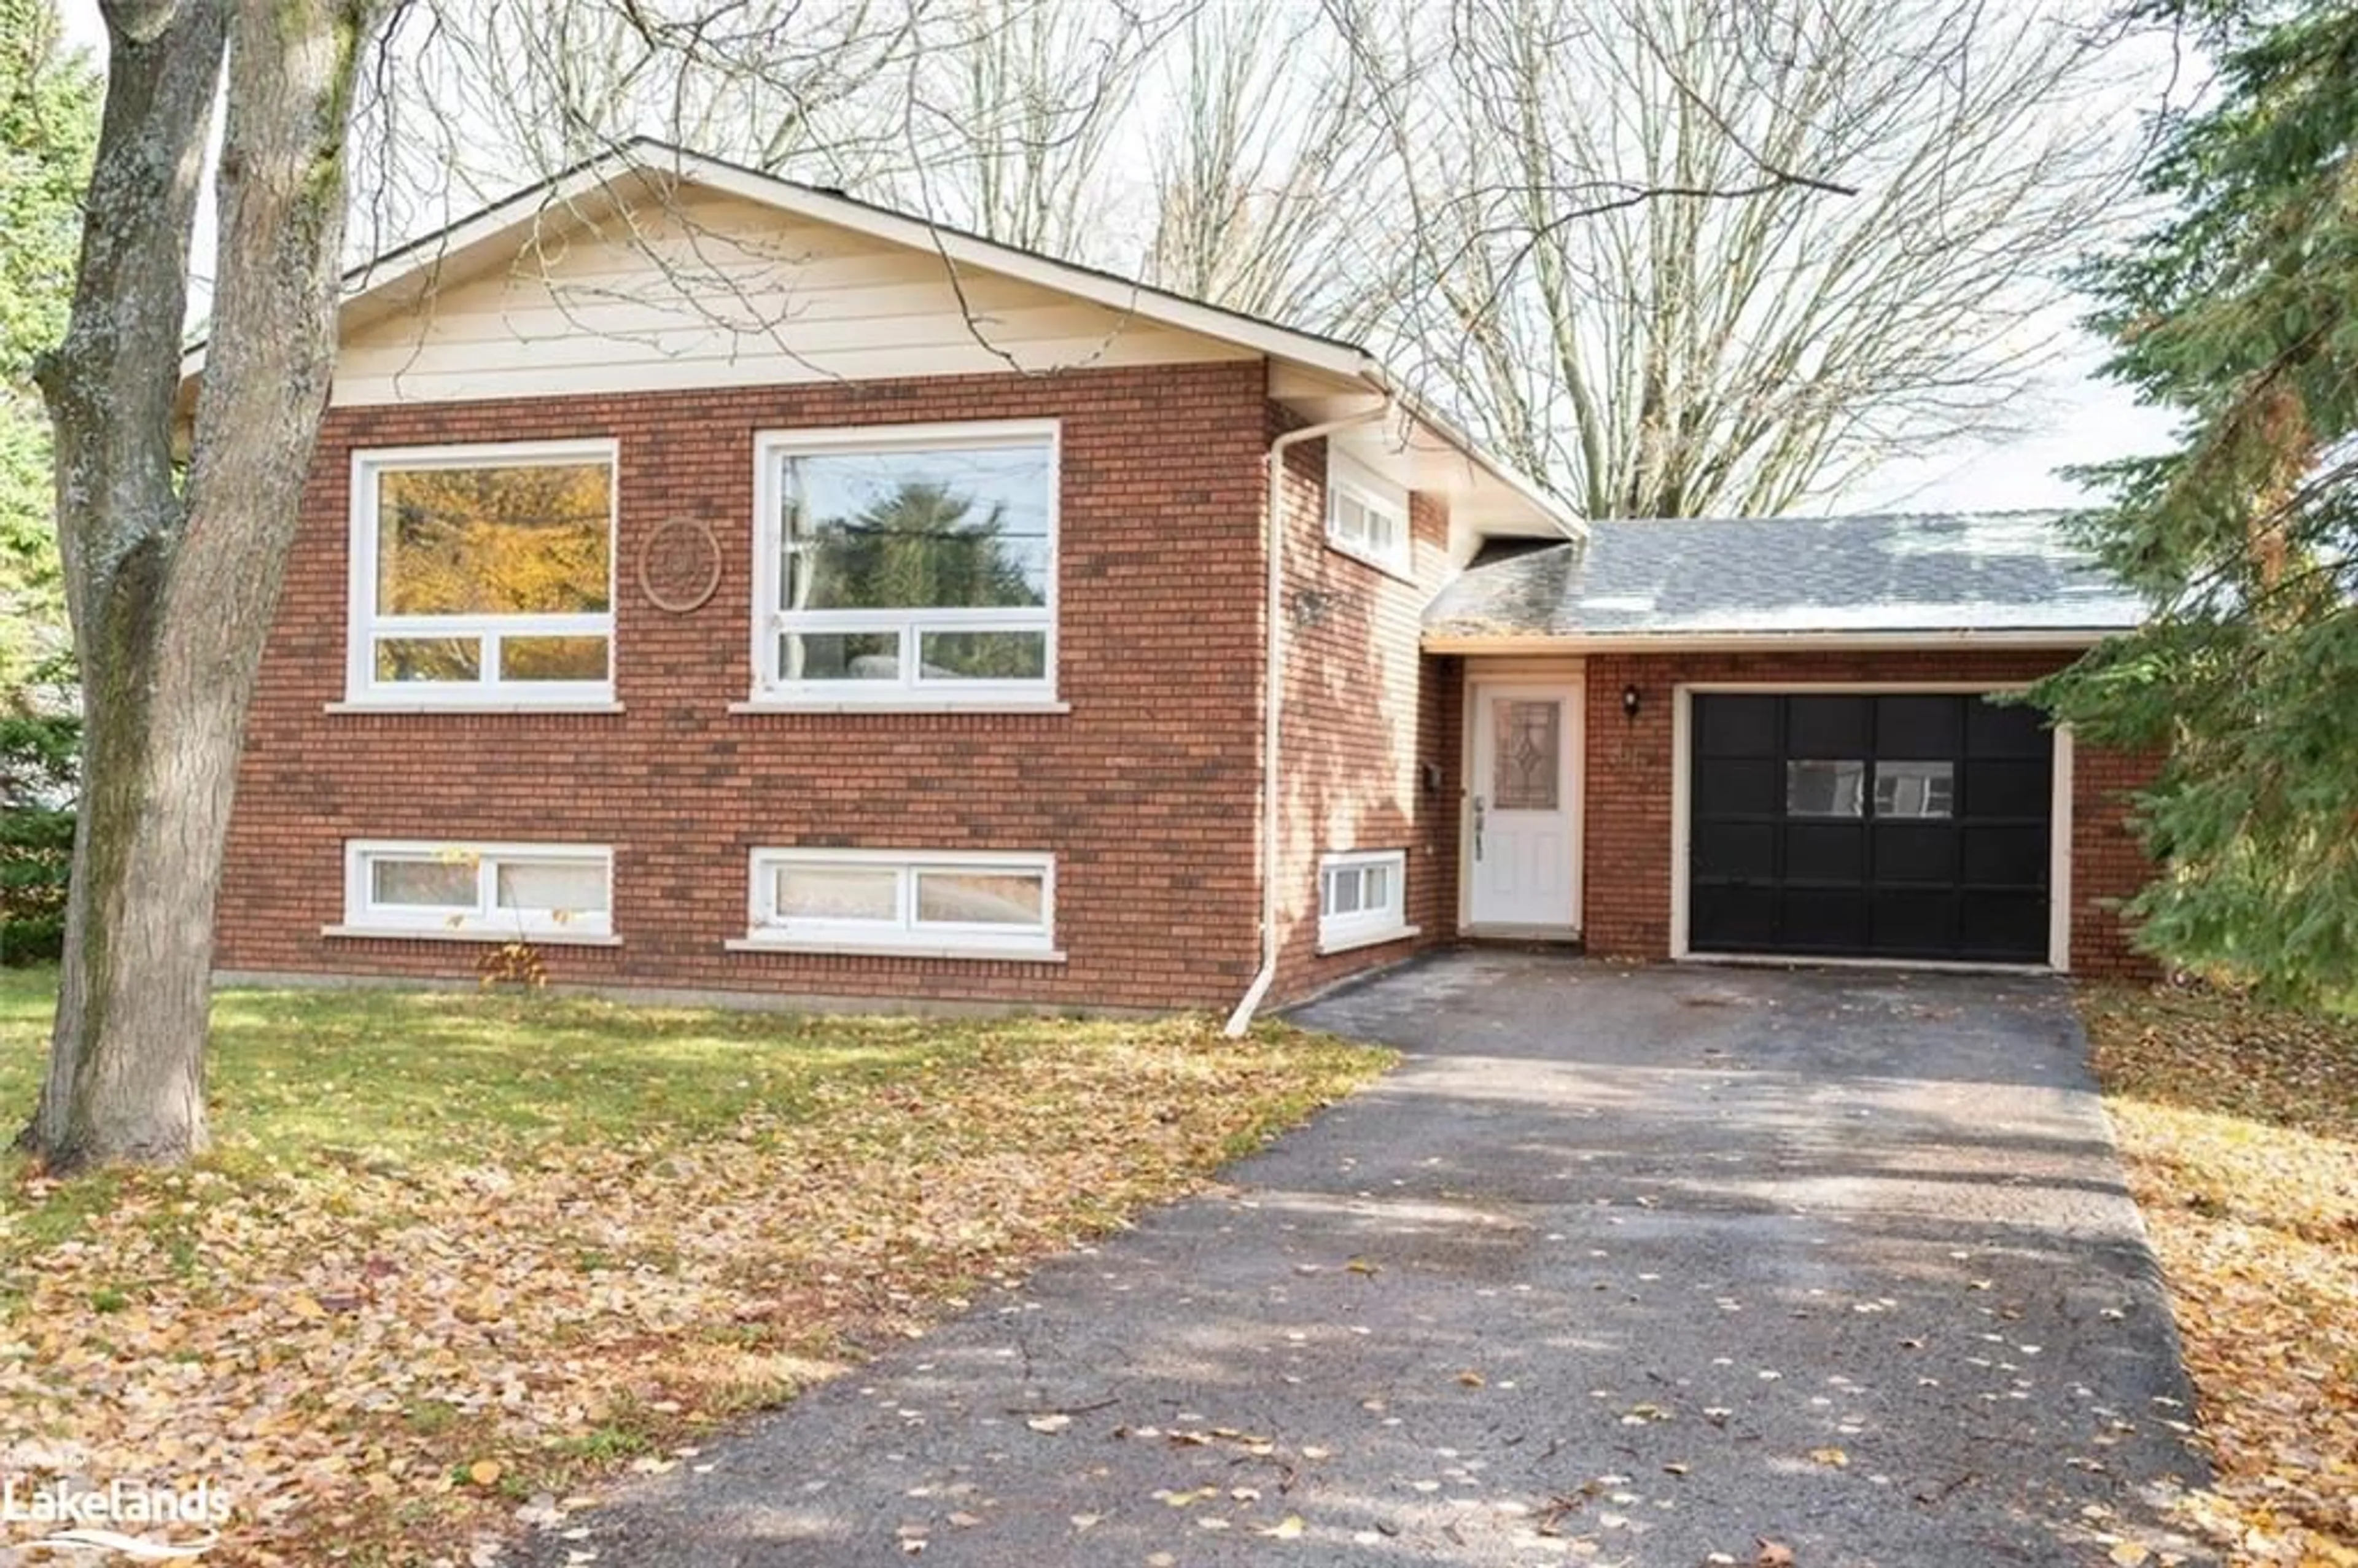 Home with brick exterior material for 66 Second St, Orillia Ontario L3V 4B4